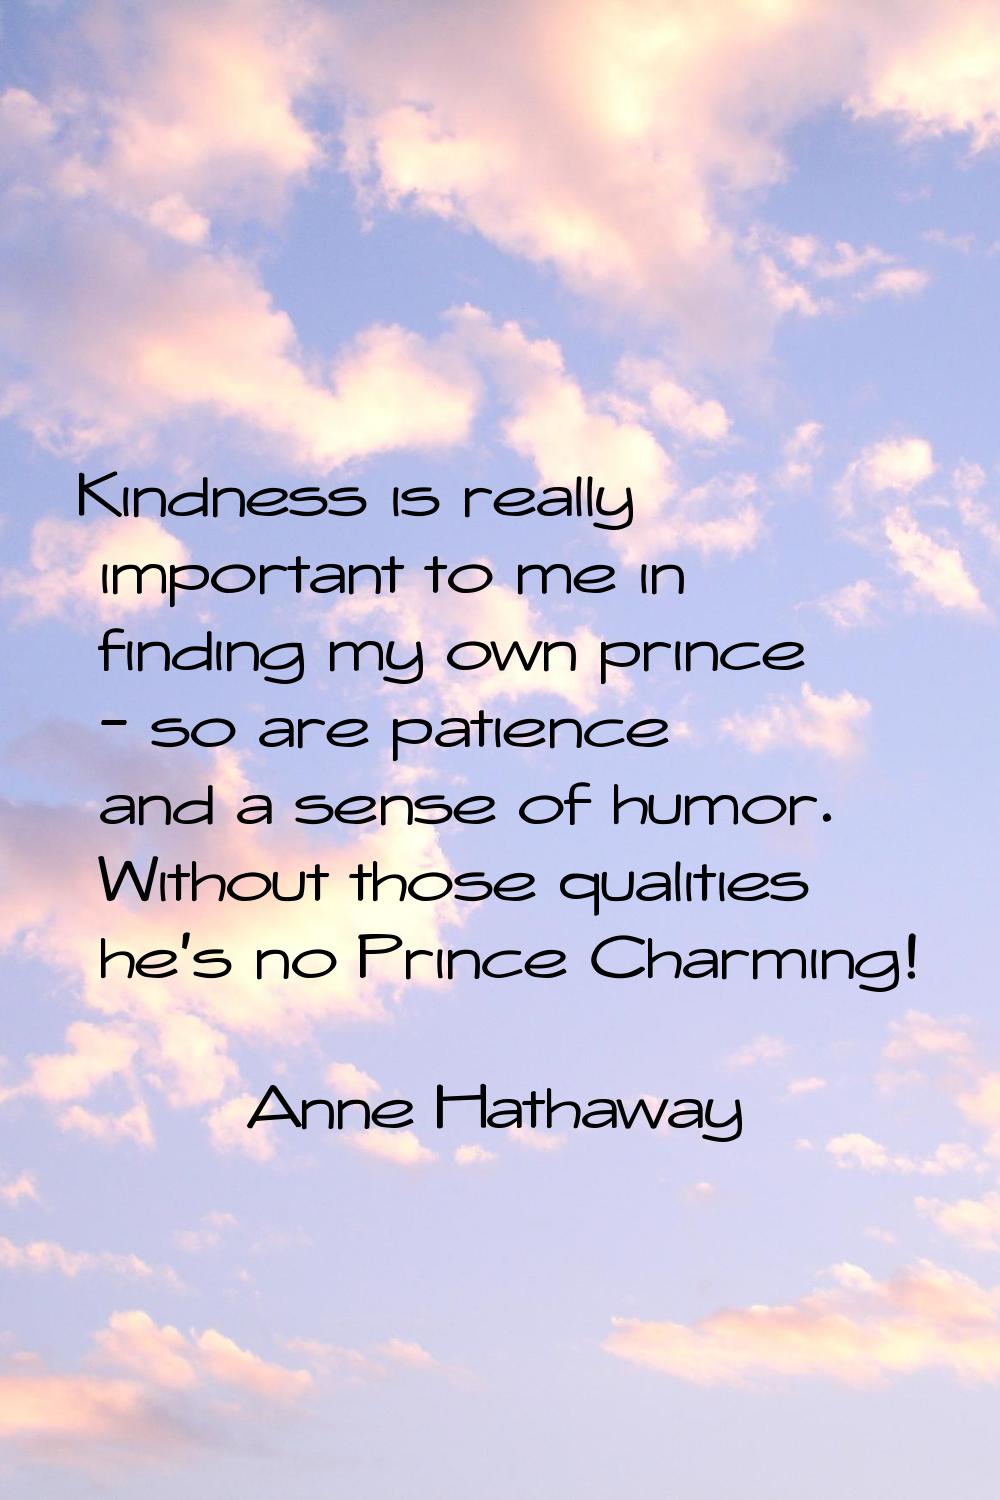 Kindness is really important to me in finding my own prince - so are patience and a sense of humor.